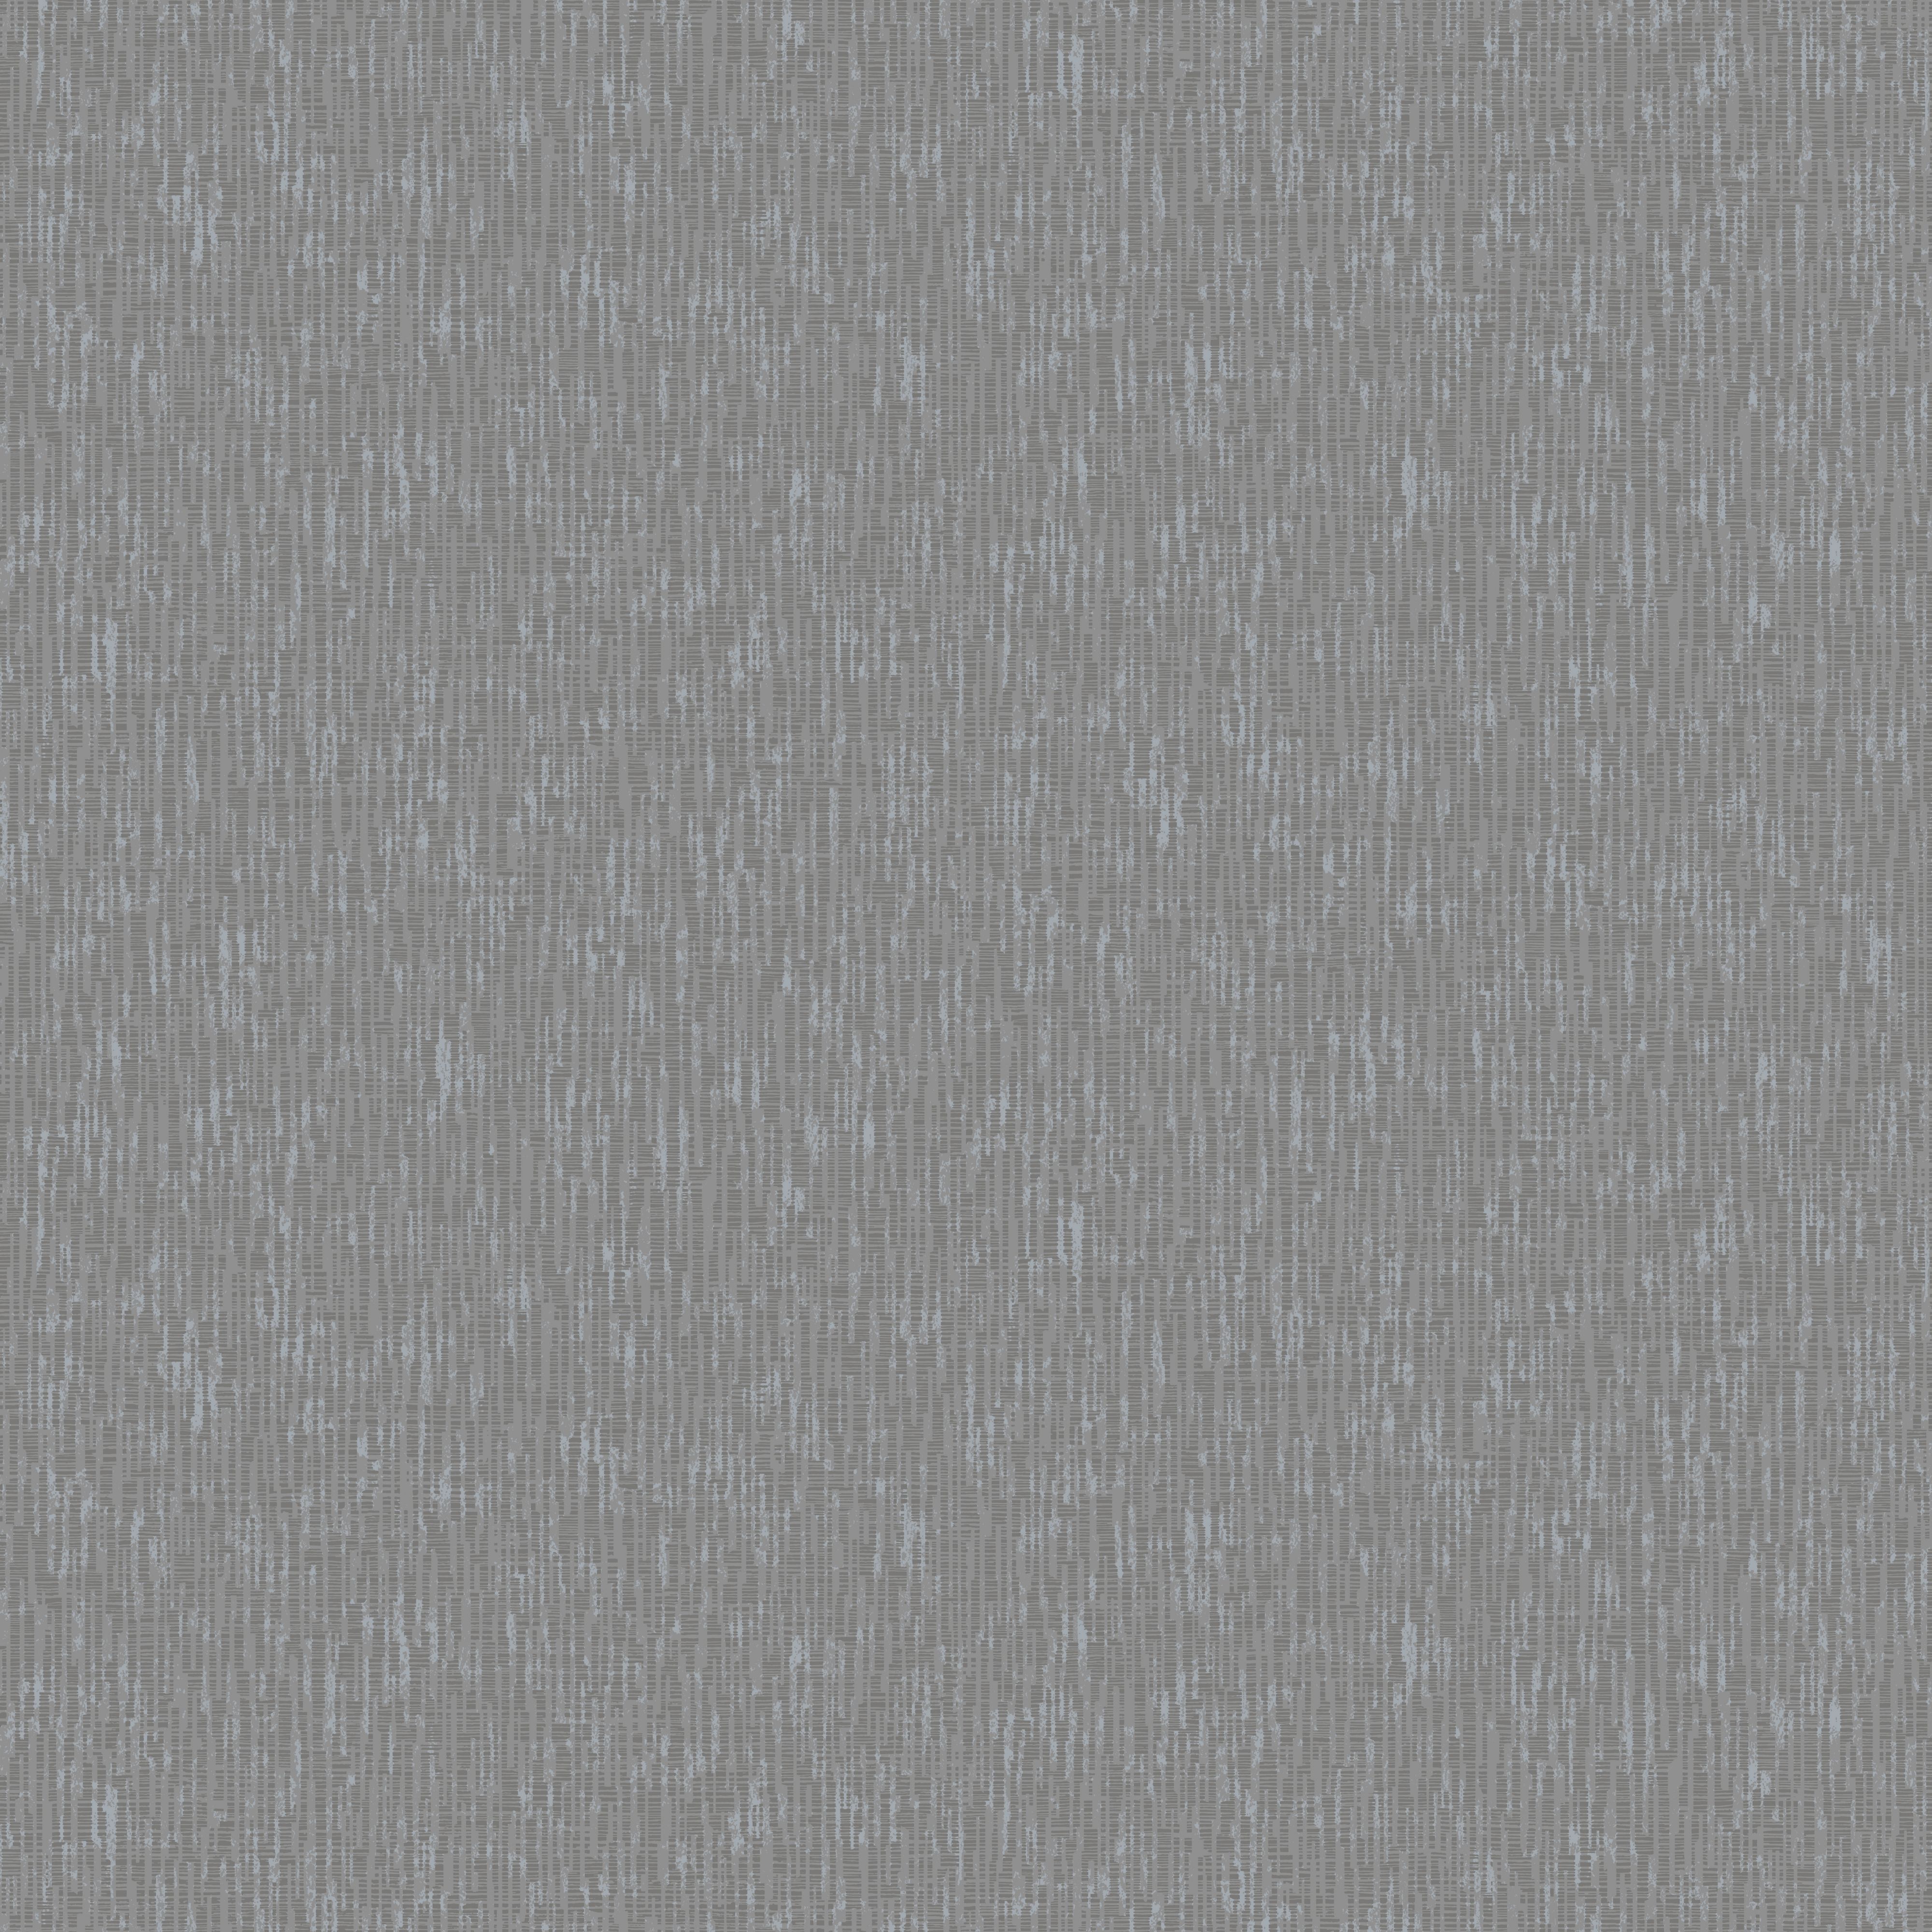 GoodHome Spinney Fusion Charcoal Mica effect Textured Wallpaper